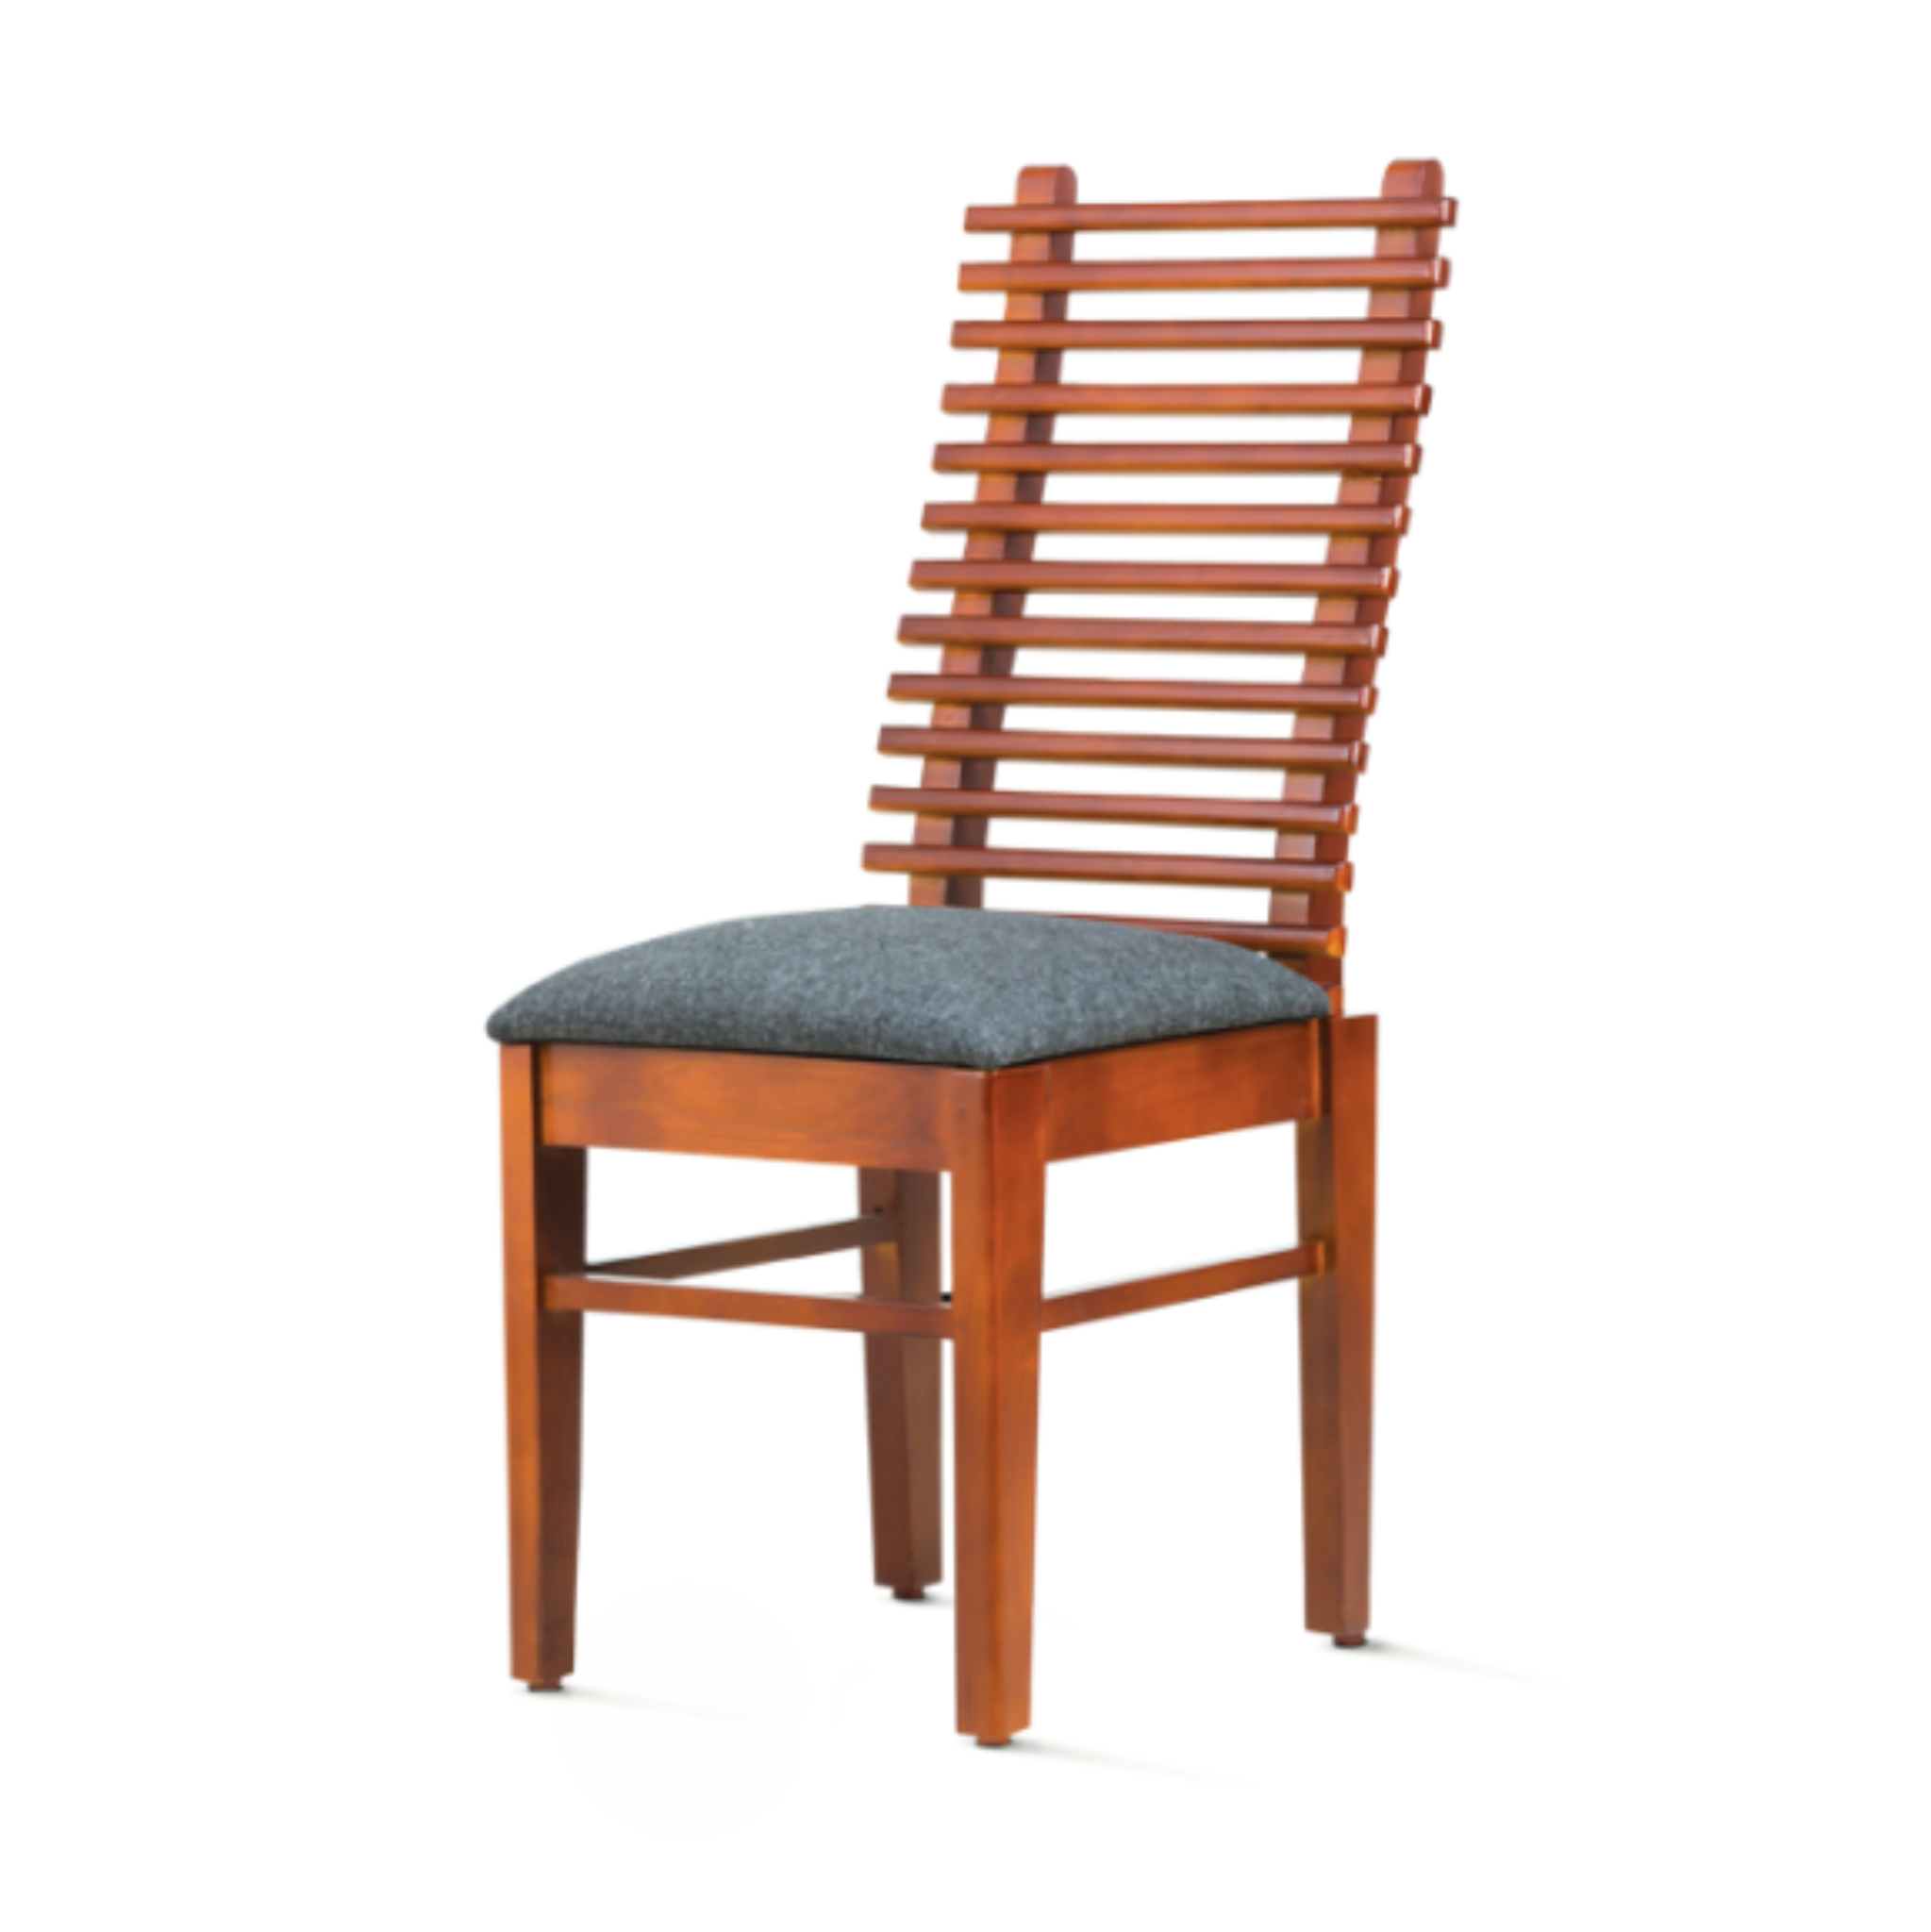 Zella Dining Chair